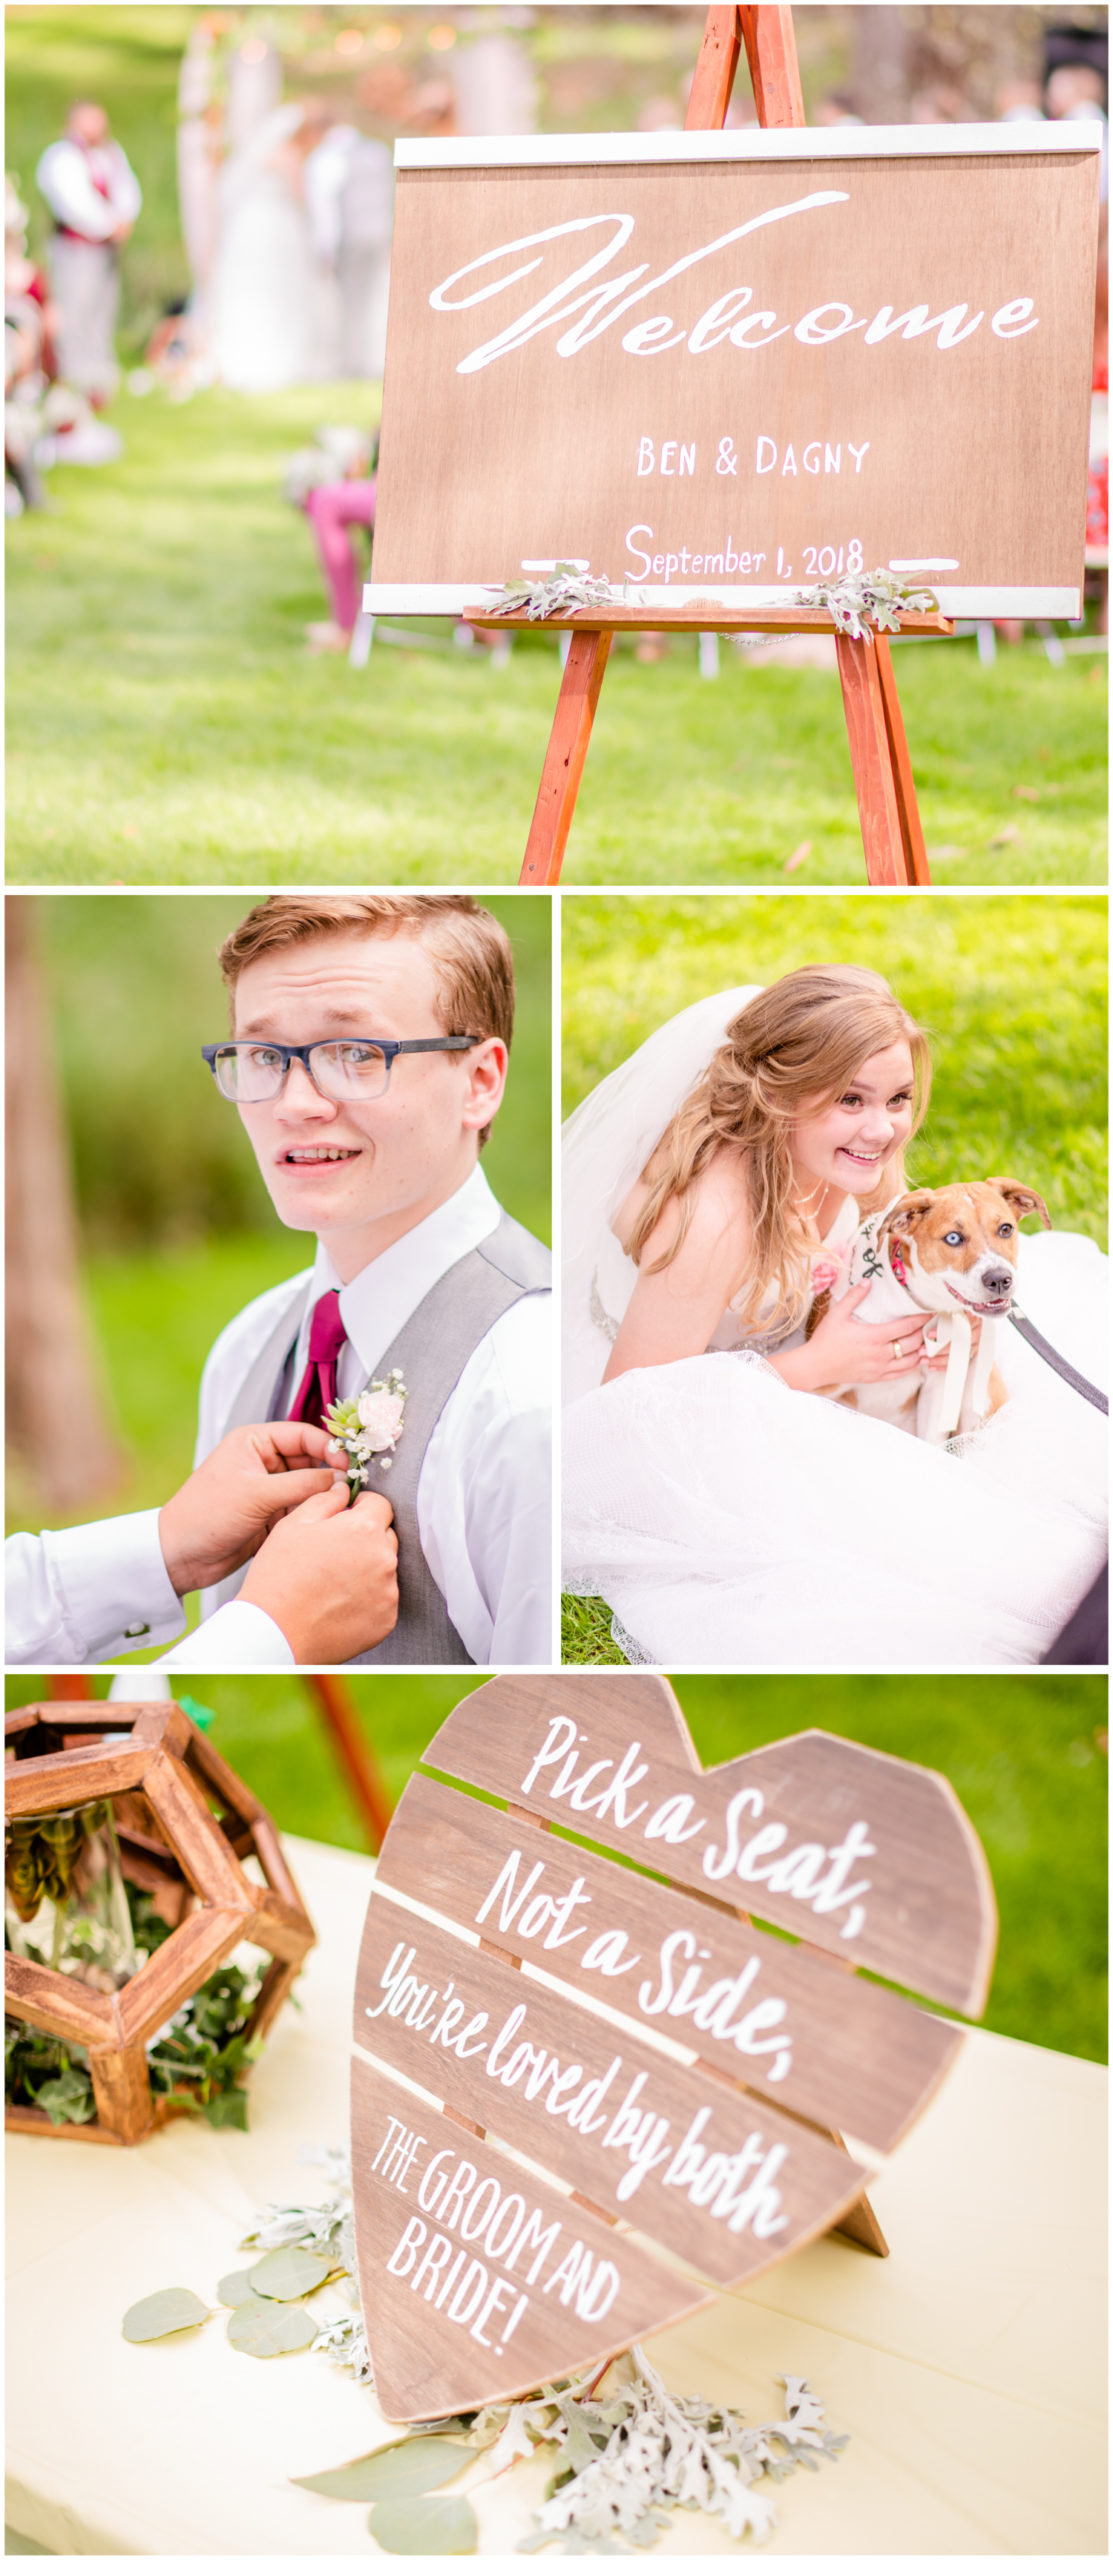 Summer Wedding in Greeley at Glenmere Park and The Armory | Britni Girard Photography - Wedding Photographer - Bride and Groom Classic Car